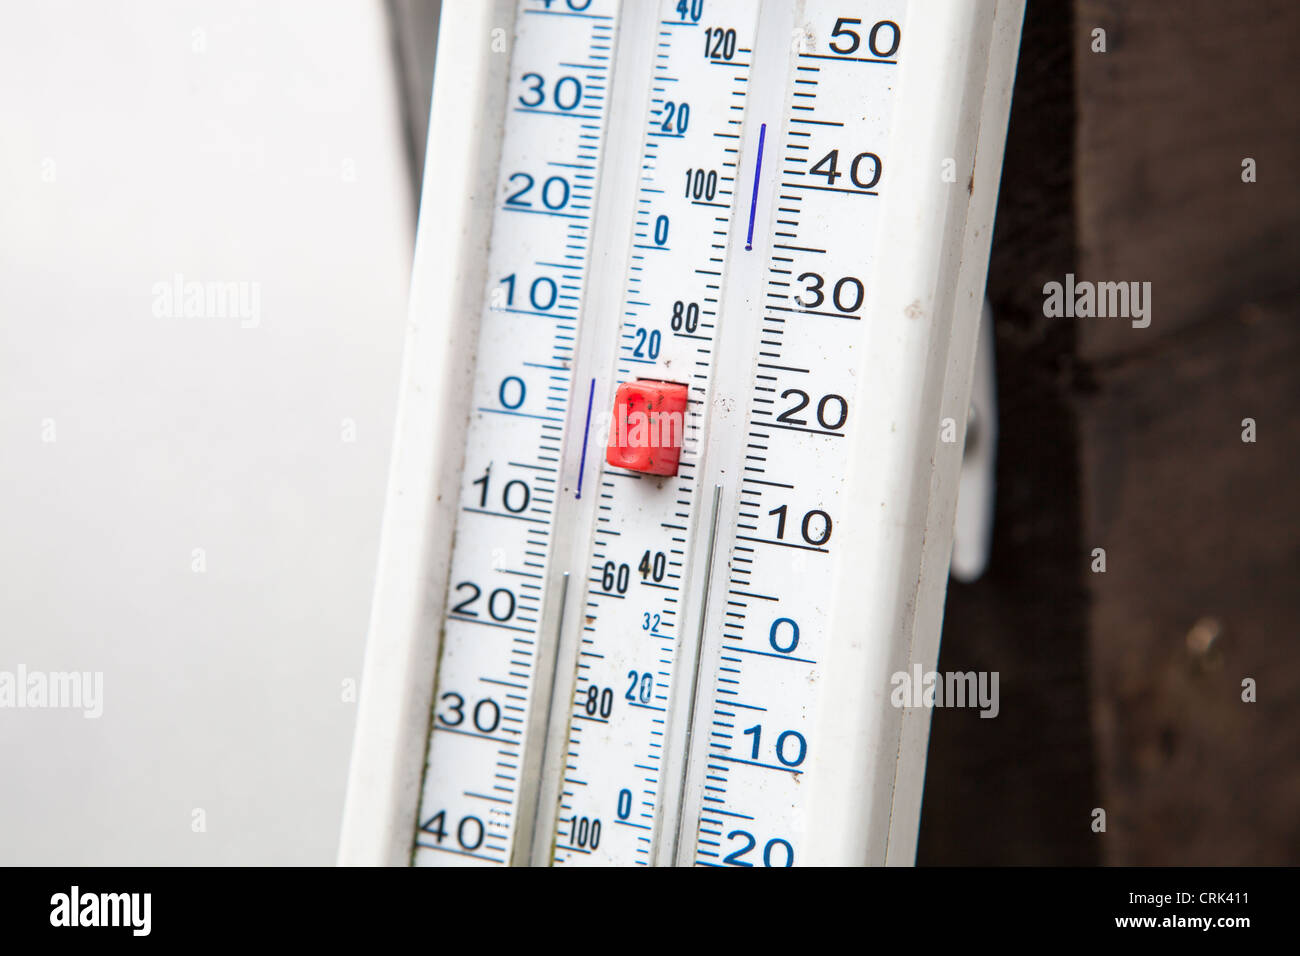 https://c8.alamy.com/comp/CRK411/maximum-and-minimum-thermometer-used-here-in-the-garden-to-keep-track-CRK411.jpg